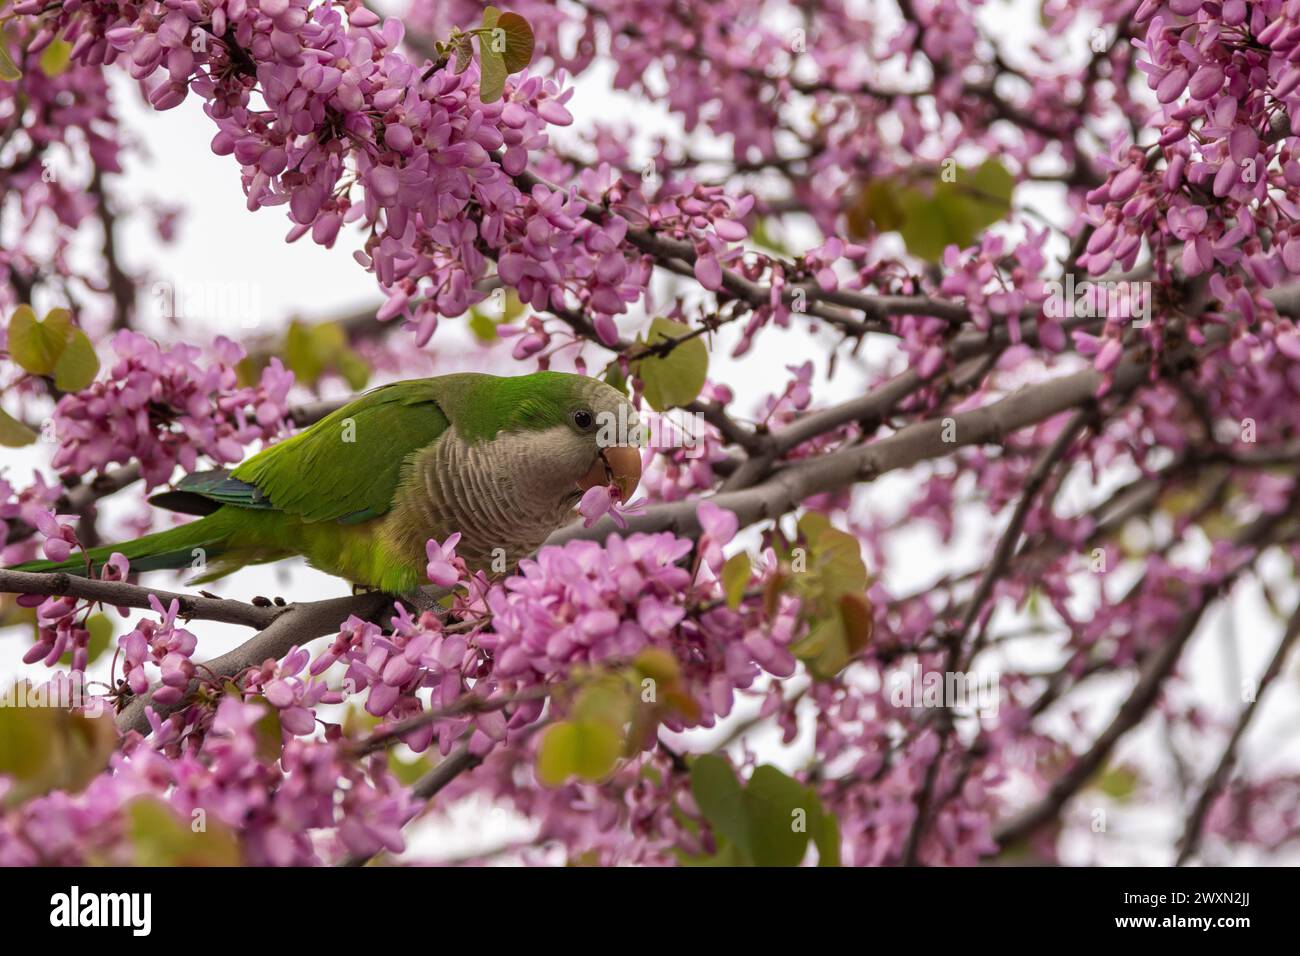 A roly-poly bird perched on a branch, enjoying flowers from a tre Stock Photo